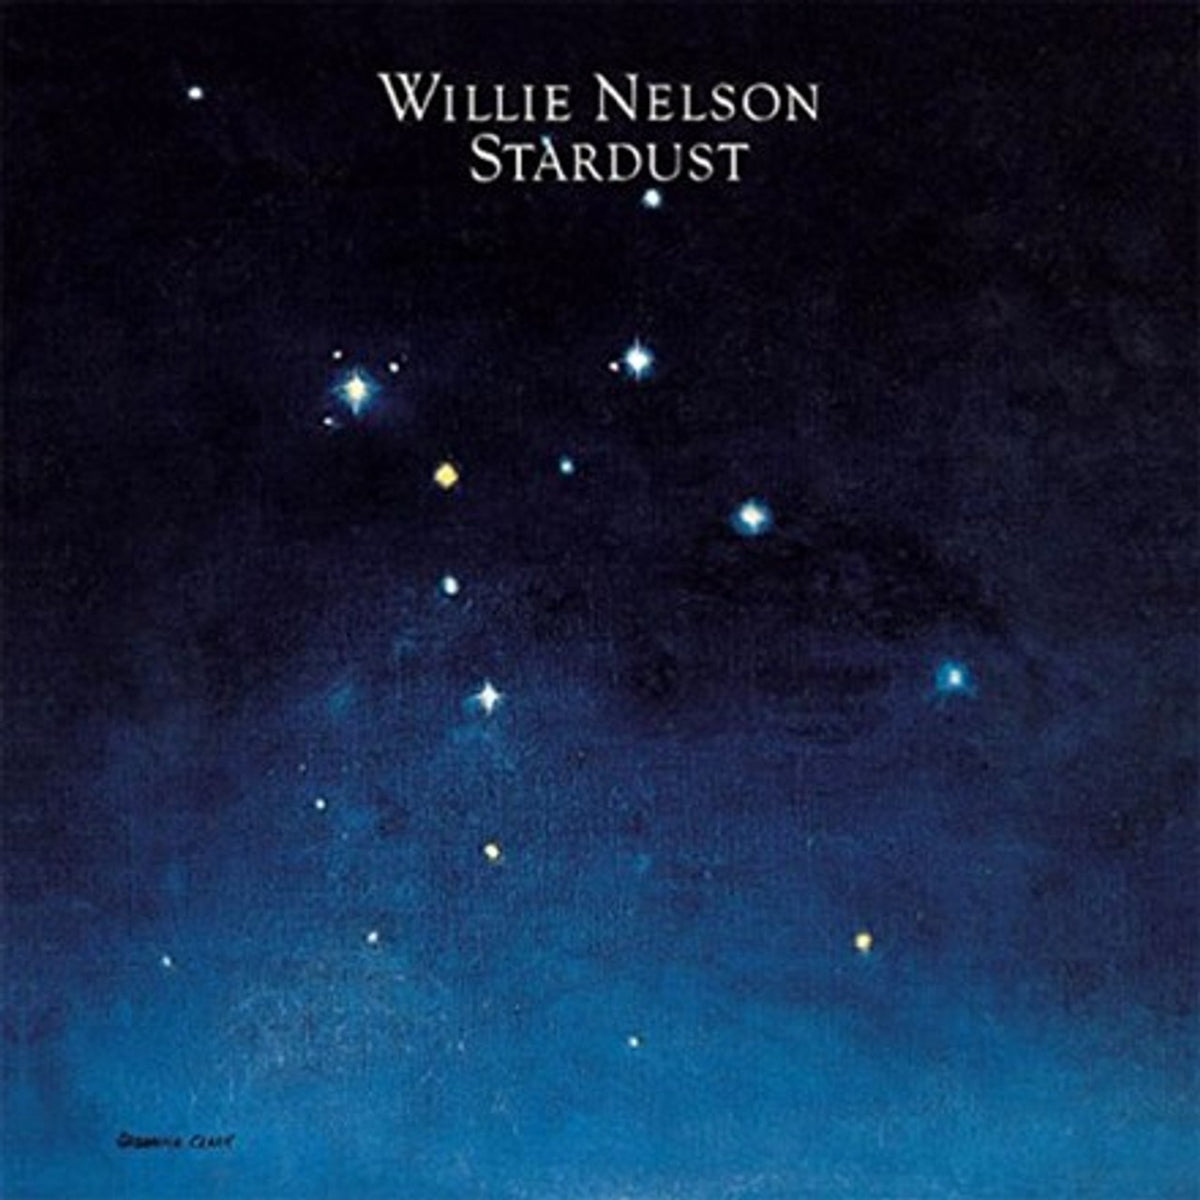 Willie Nelson - Stardust 2LP (180g, 45rpm, Analogue Productions)